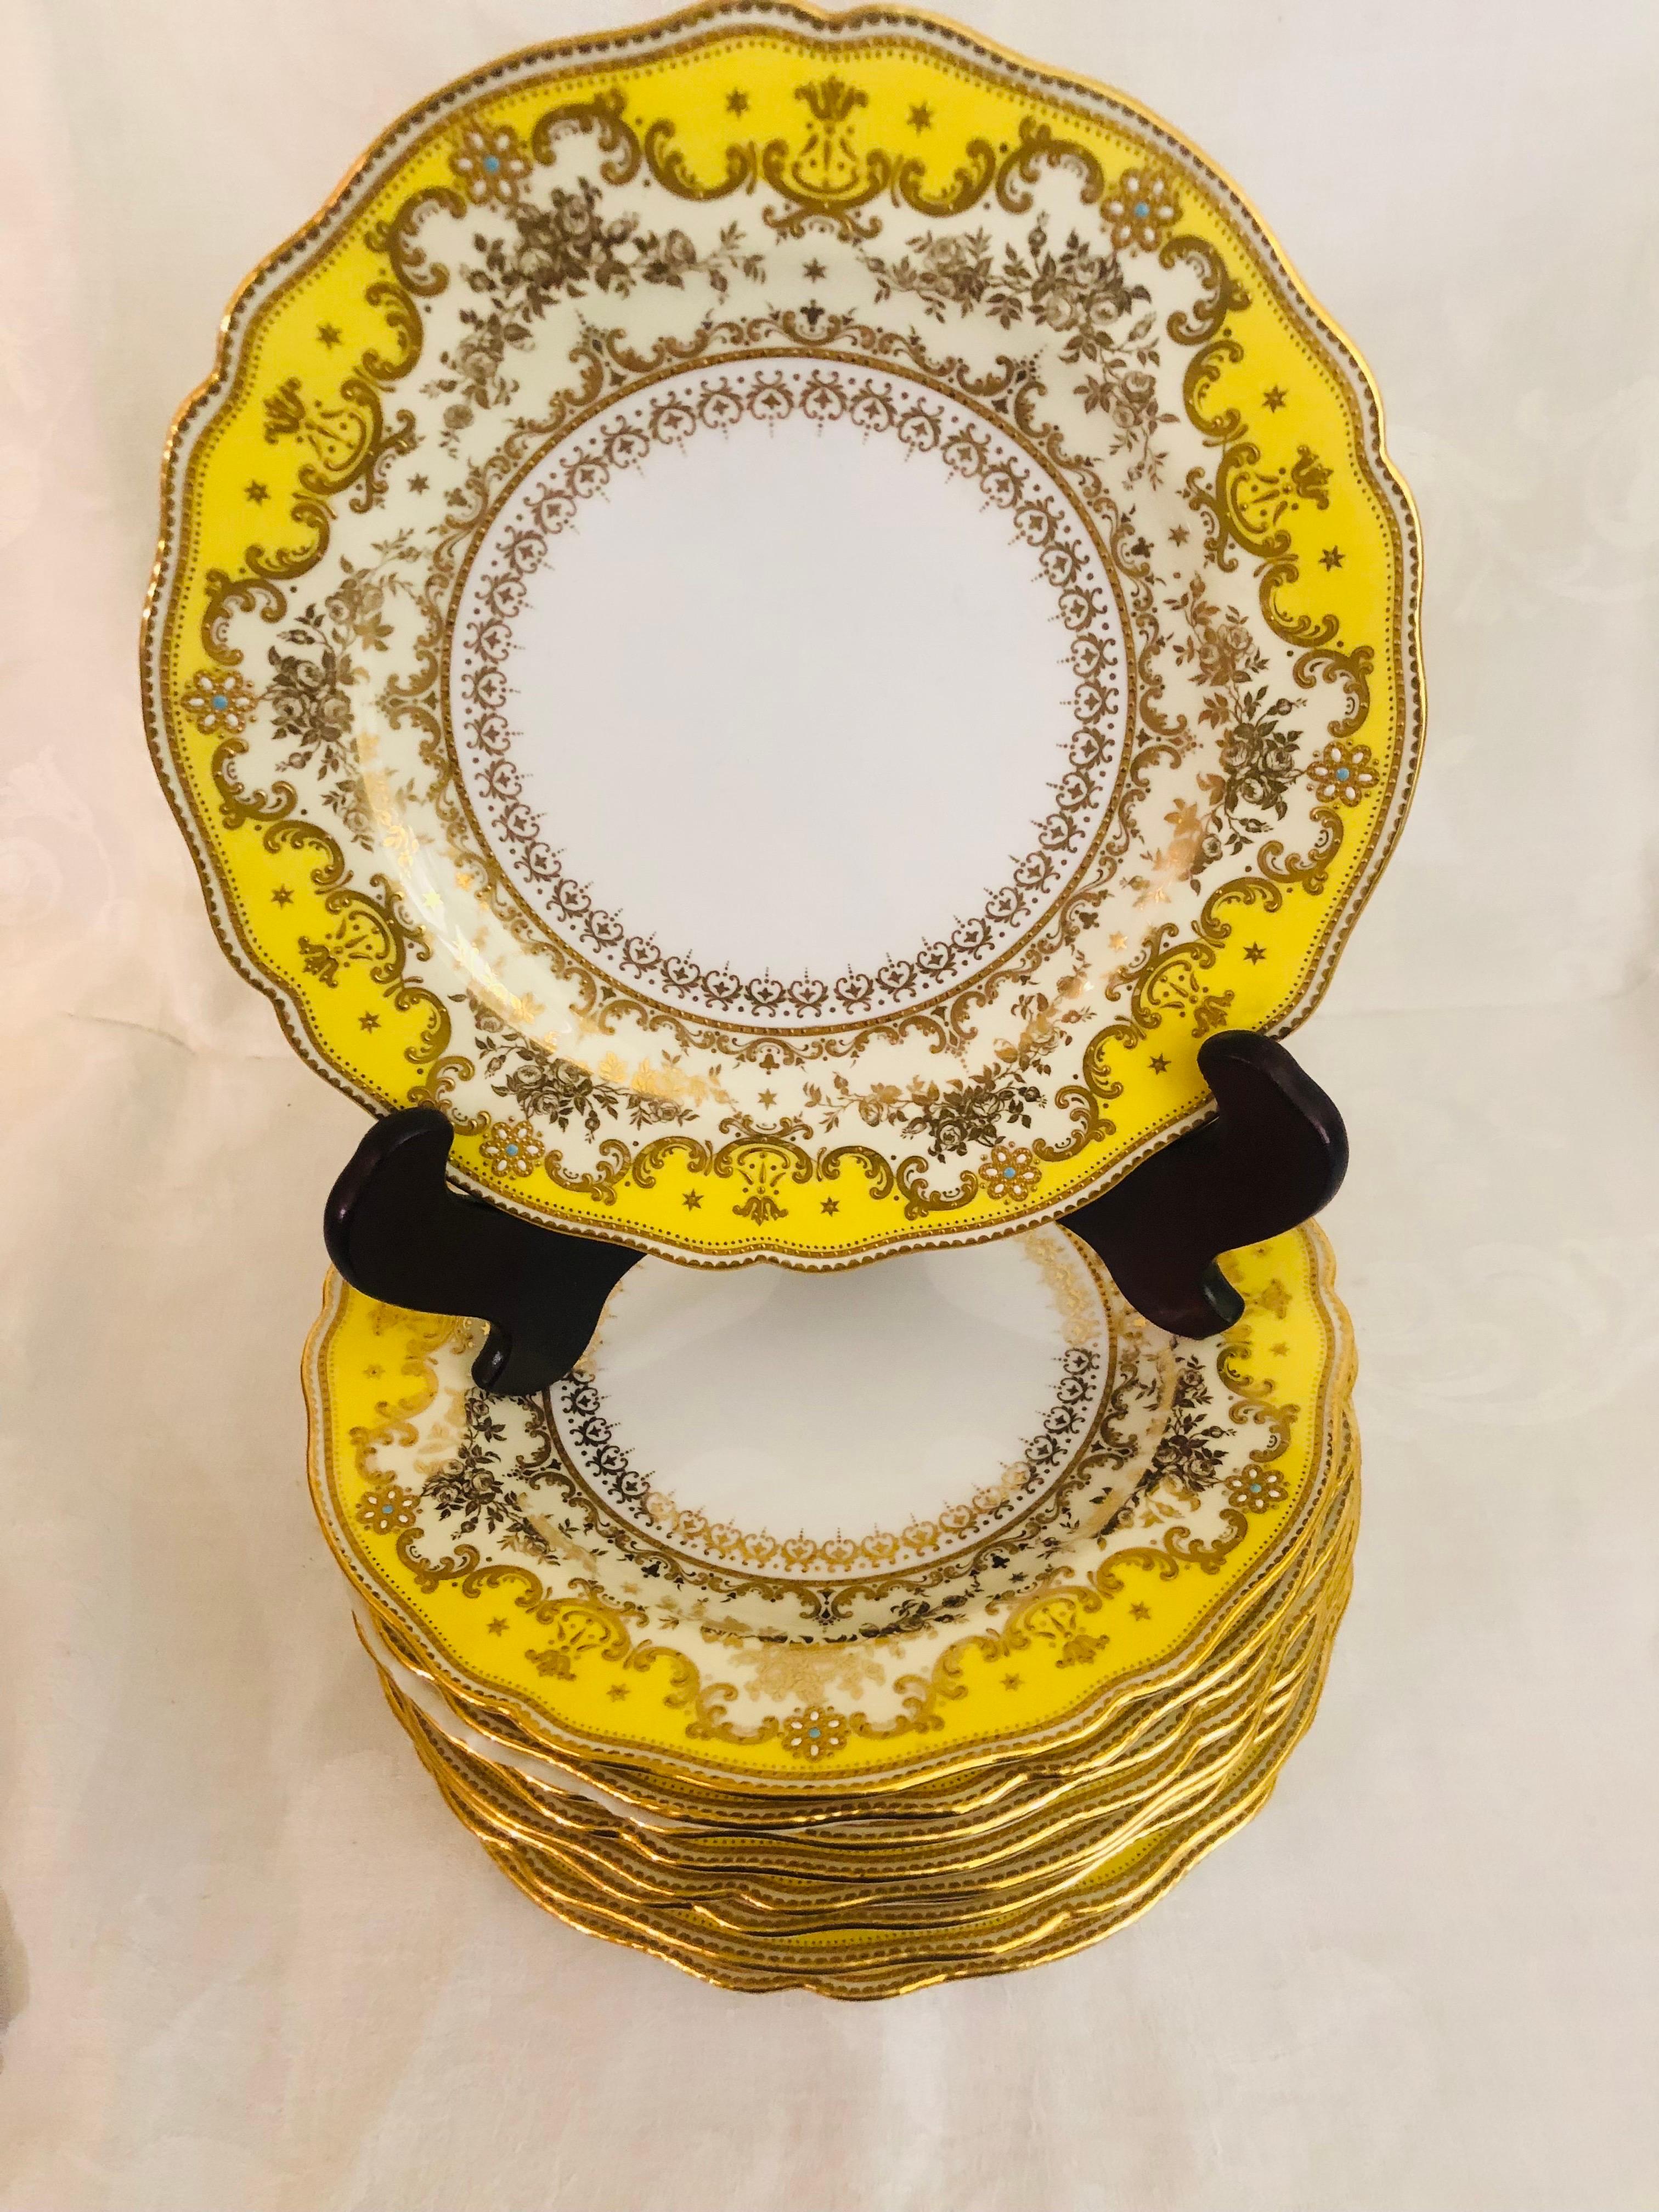 Gilt Set of Eleven Yellow Spode Copeland Jeweled Dinner Plates with Raised Gilding